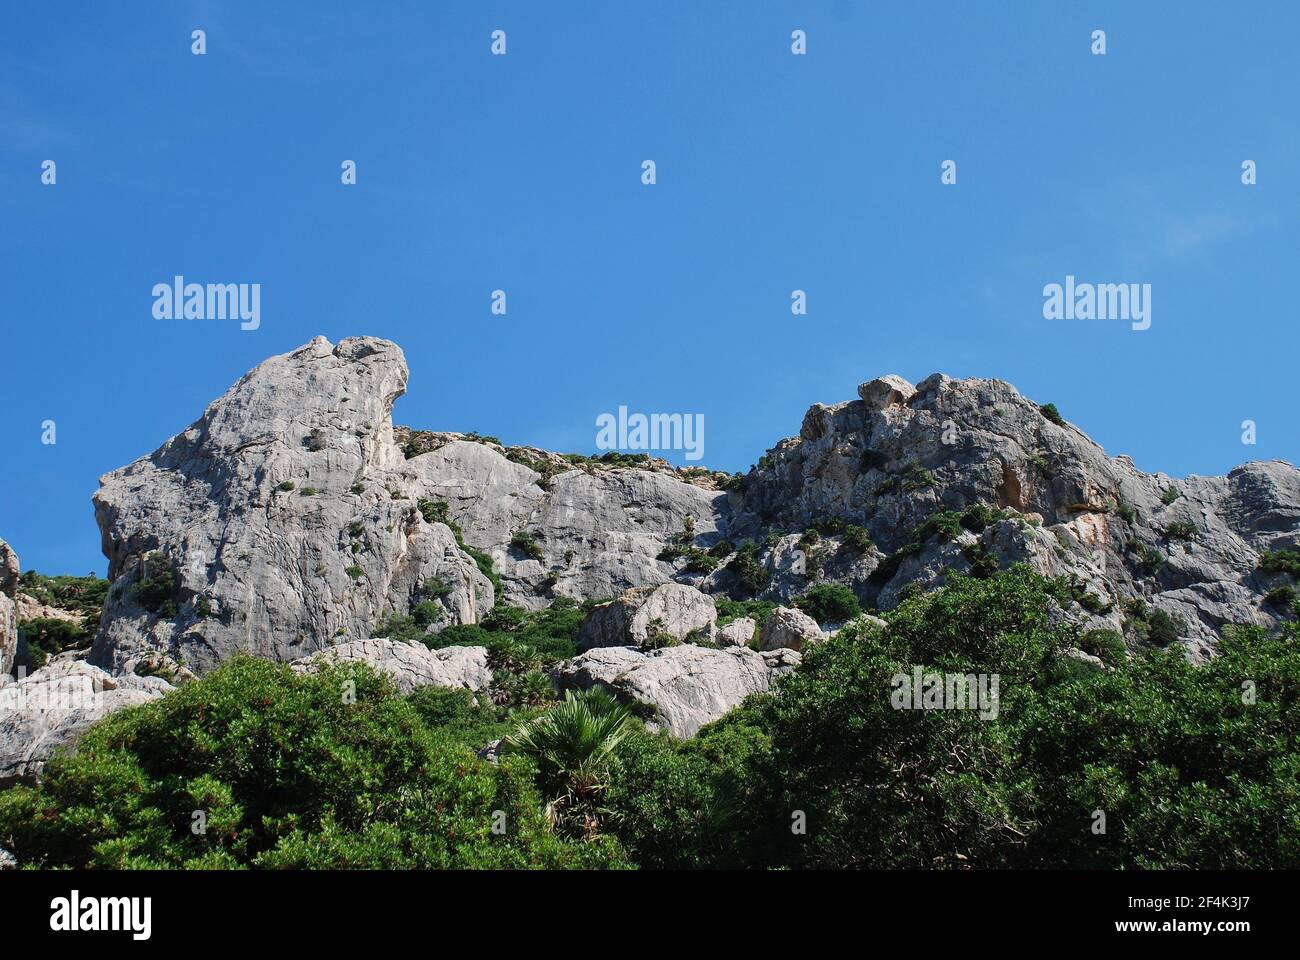 The rocky peaks of the Tramuntana mountains in the Boquer valley trail near Puerto Pollensa on the Spanish island of Majorca. Stock Photo